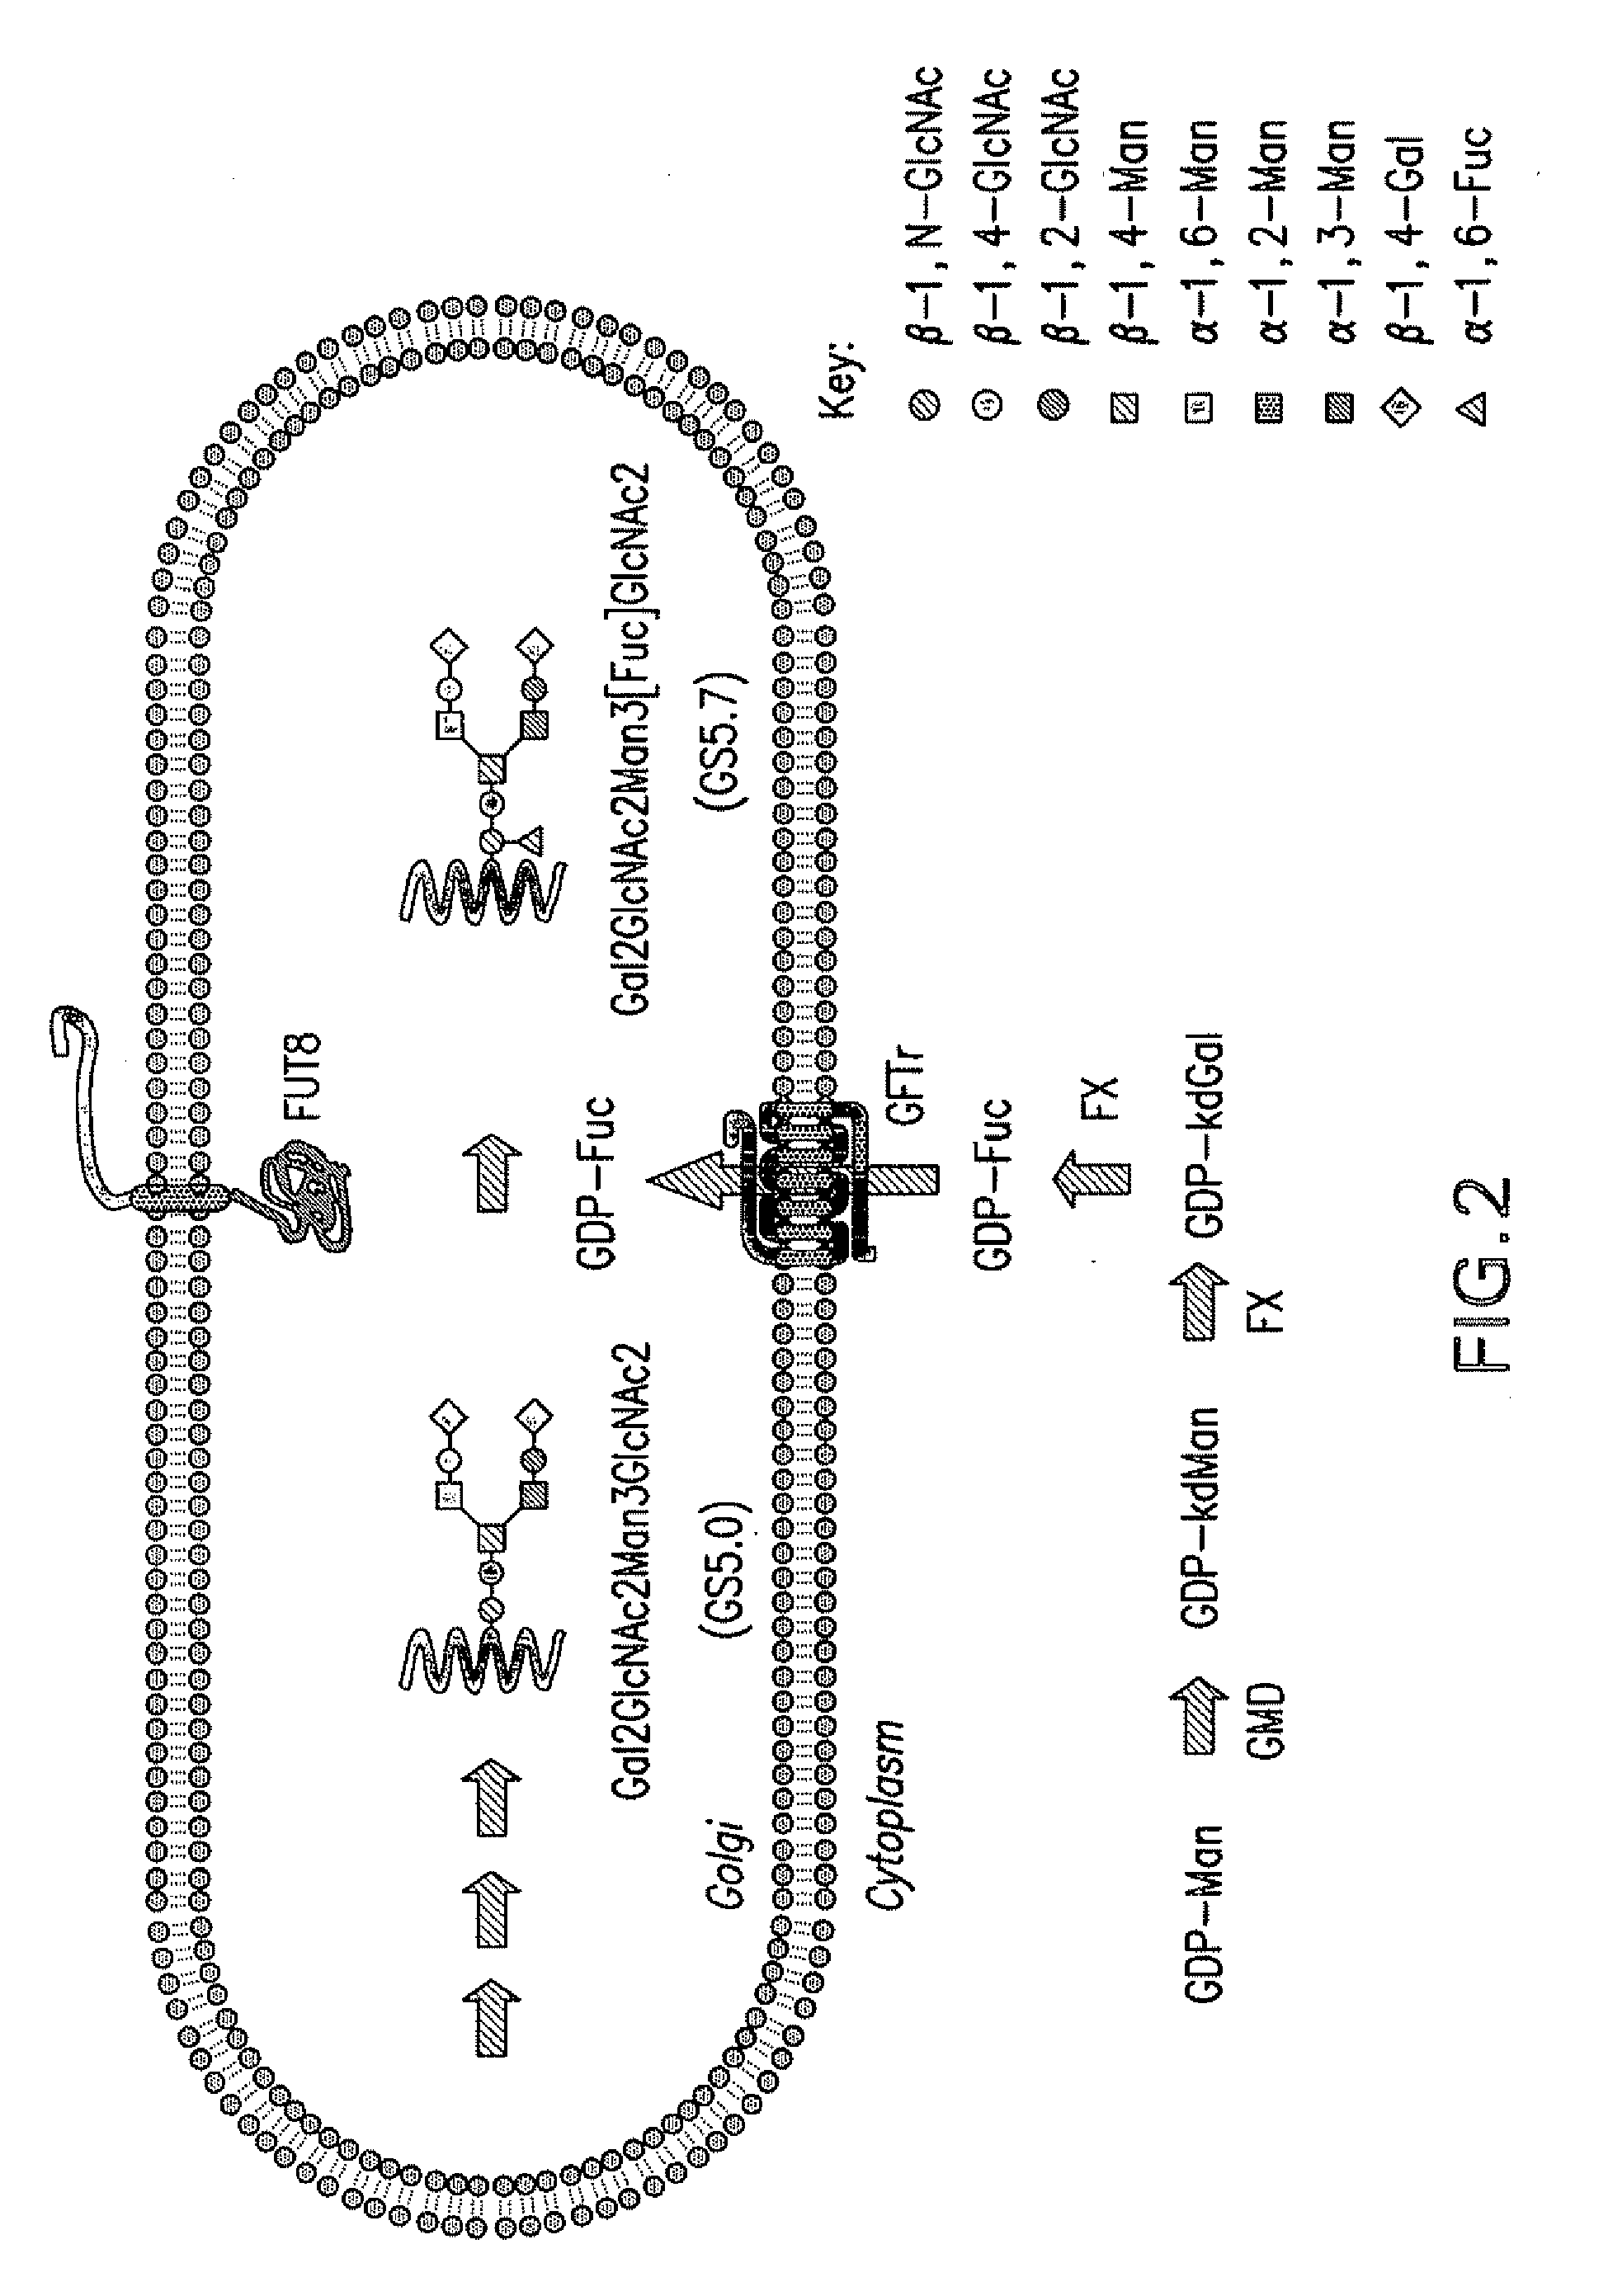 Production of glycoproteins with modified fucosylation